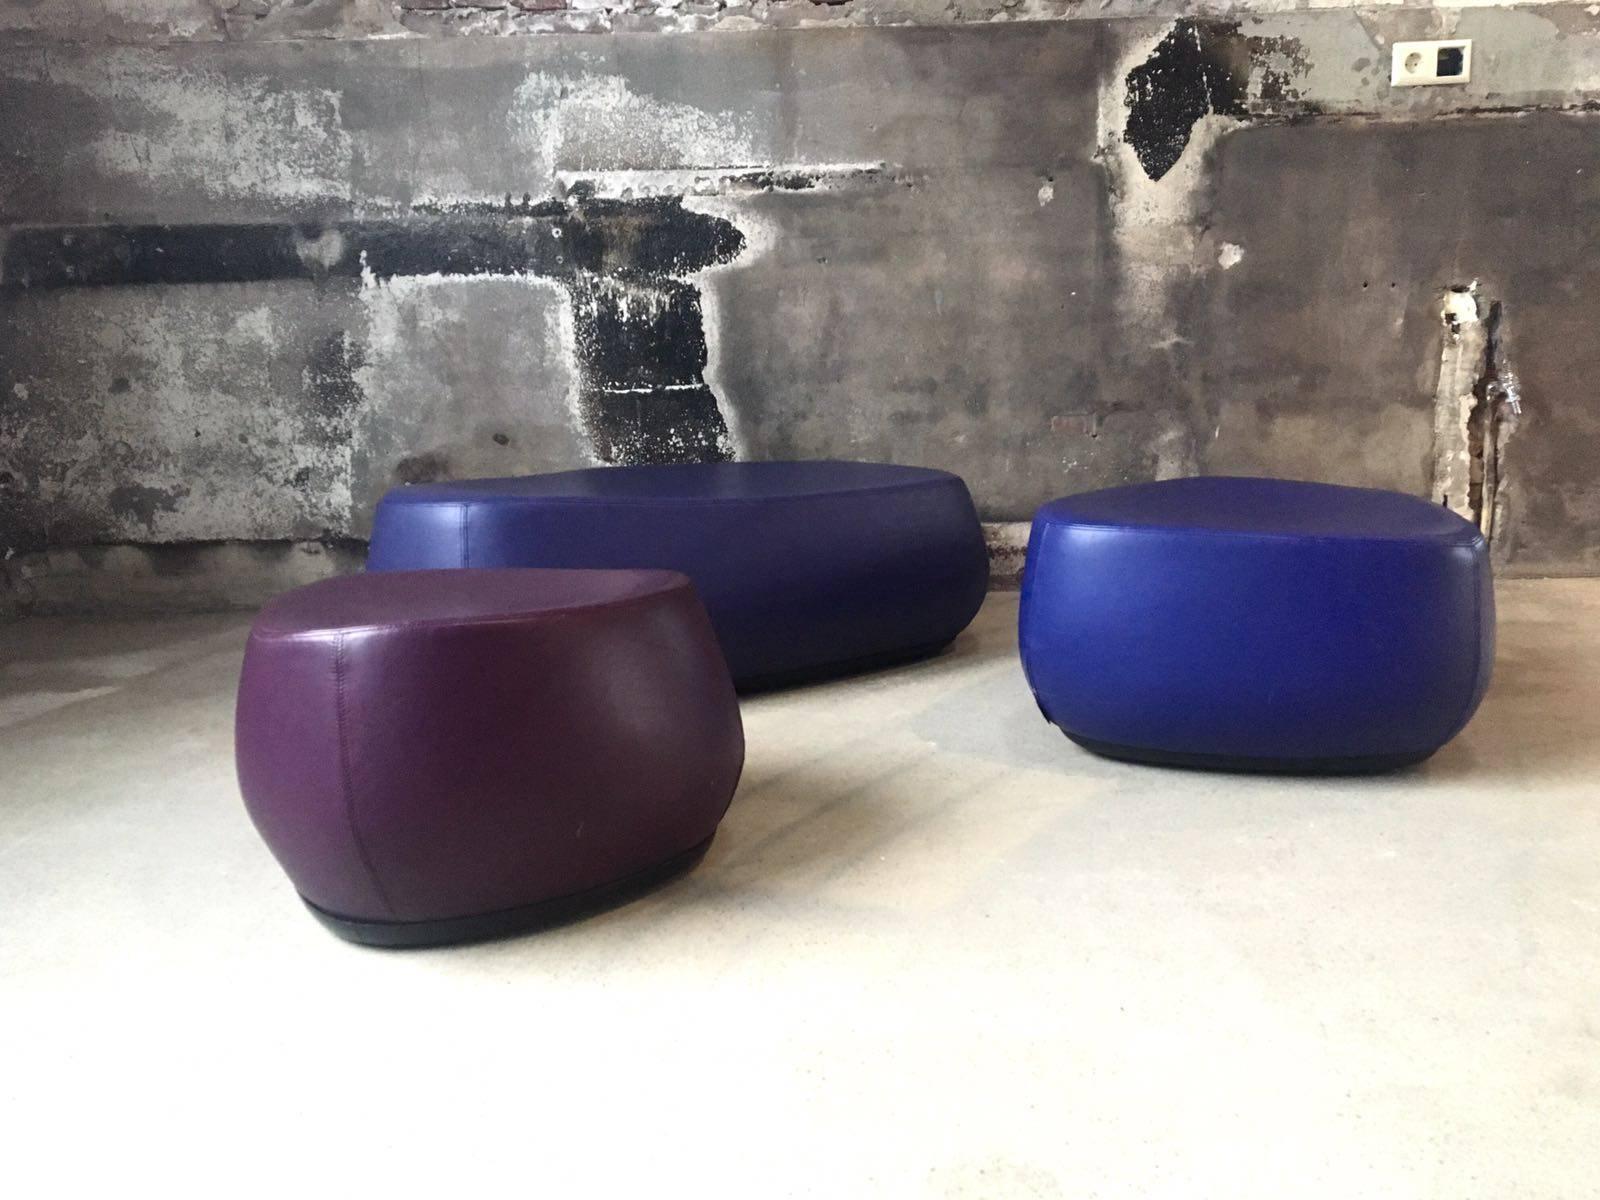 These stones were designed in 2002 by Patricia Urquiola for Moroso Italy. They are part of the Fjord seating collection that is comprised of a large, medium and a smaller stool or stone. This set come in three kinds of purple. They can be used as